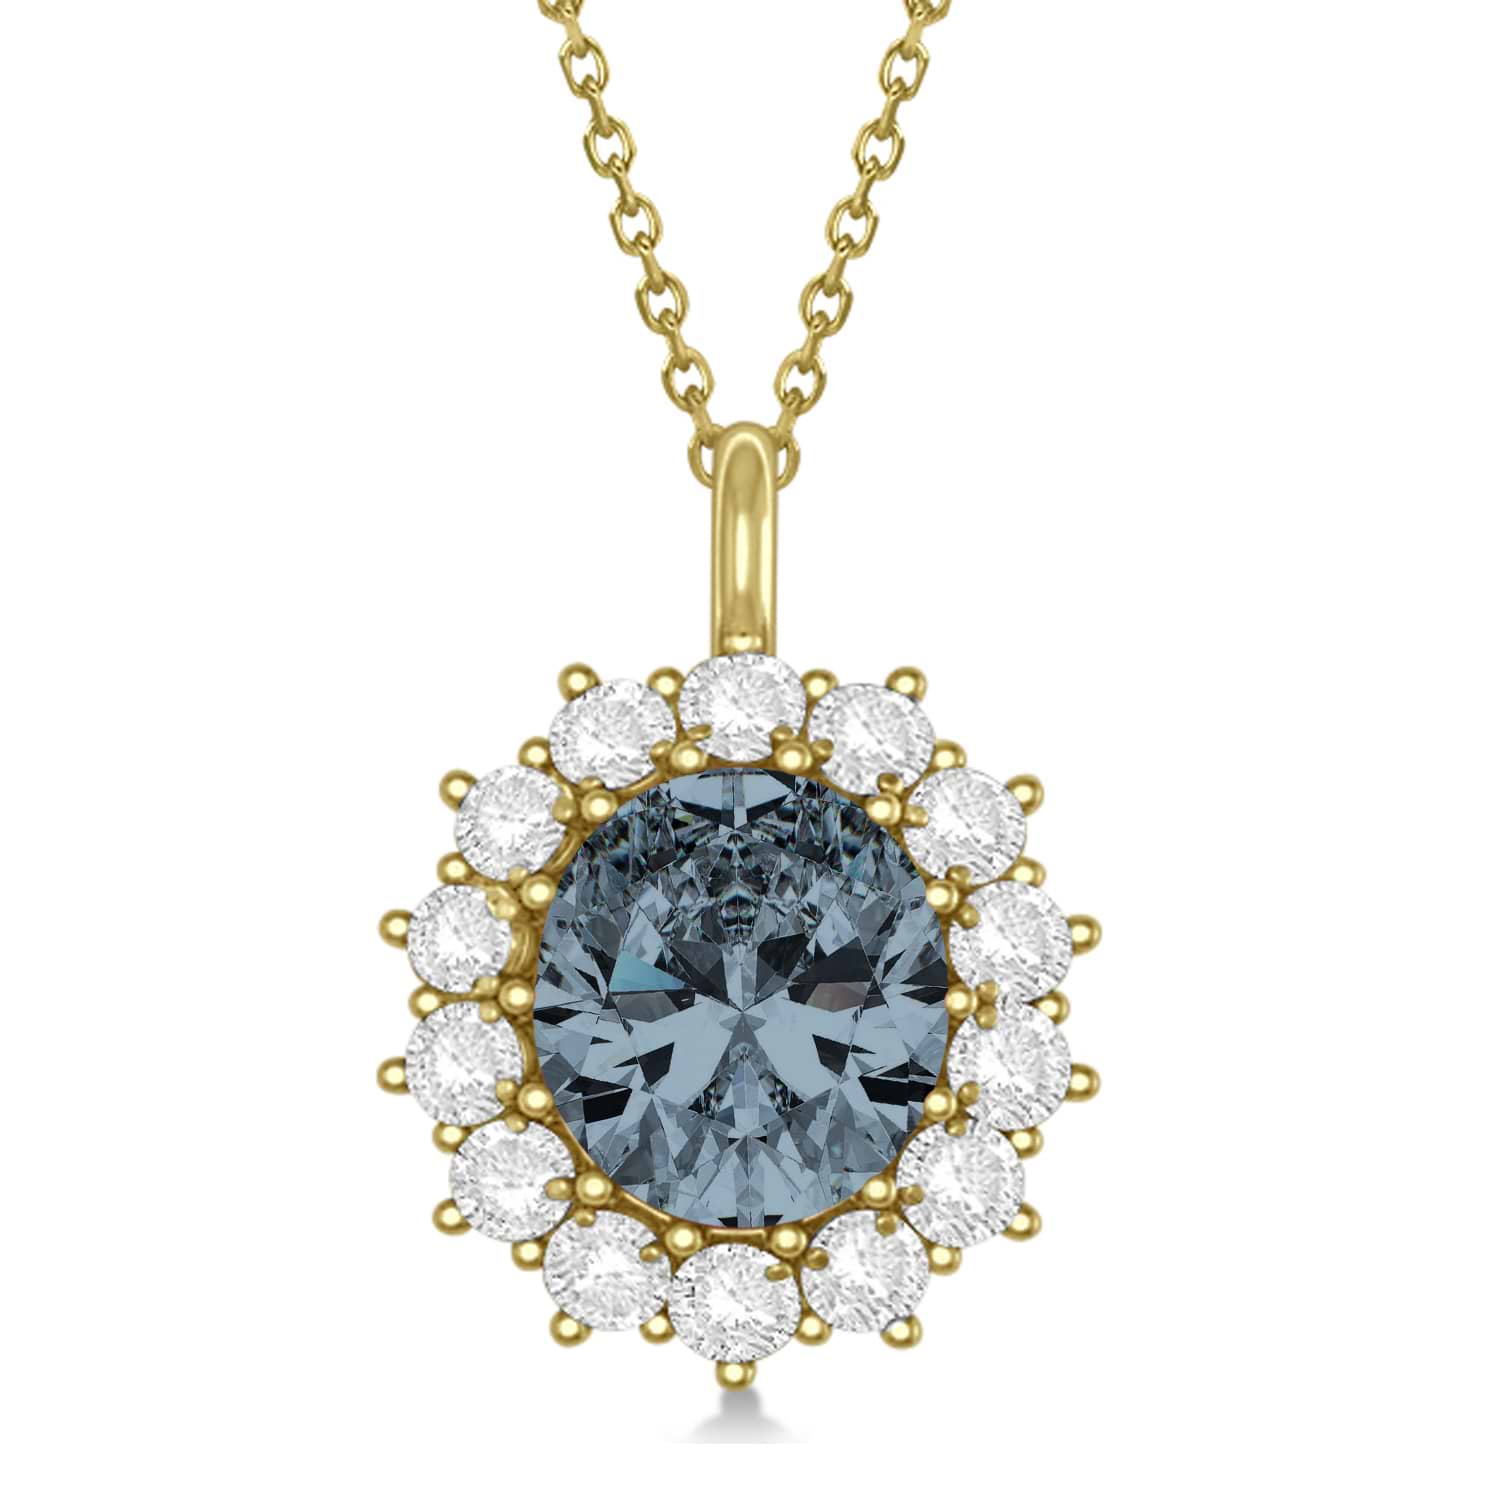 Oval Gray Spinel and Diamond Pendant Necklace 14k Yellow Gold (5.40ctw)